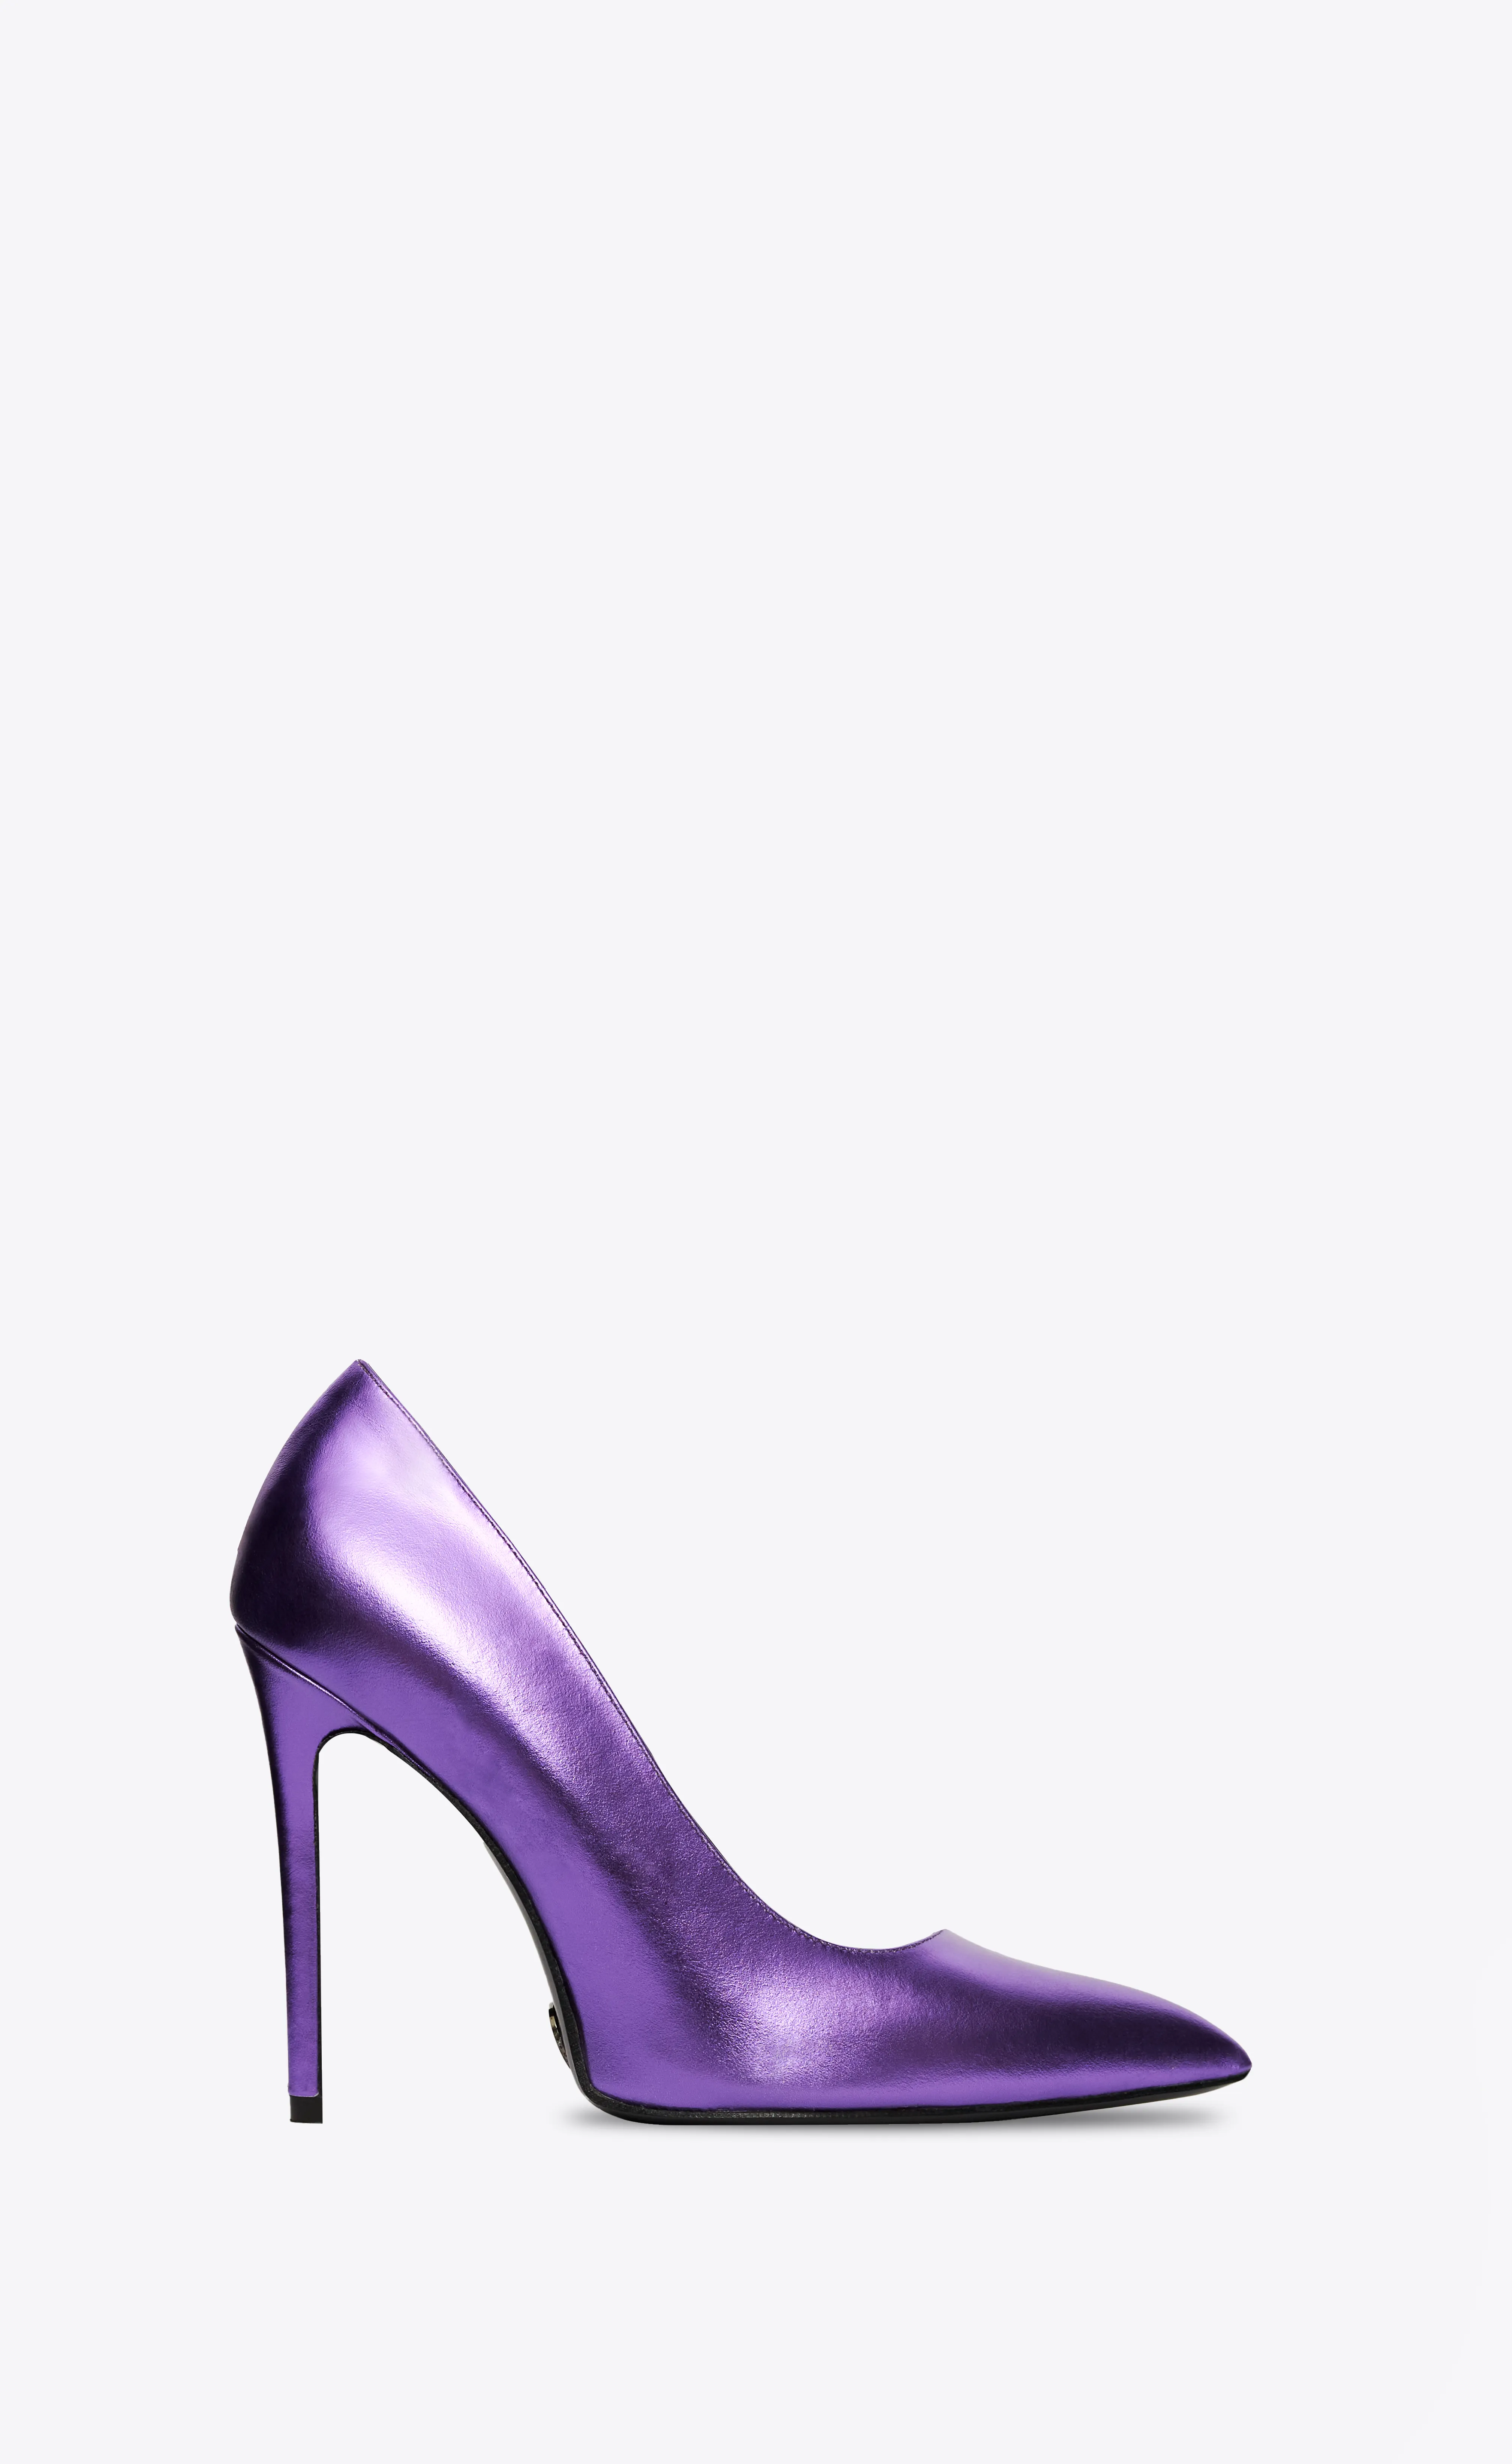 Top Quality Purple Color High Heel Decollete Shoes Sexy Shoes for Woman Made in Italy Calf Leather First Lady